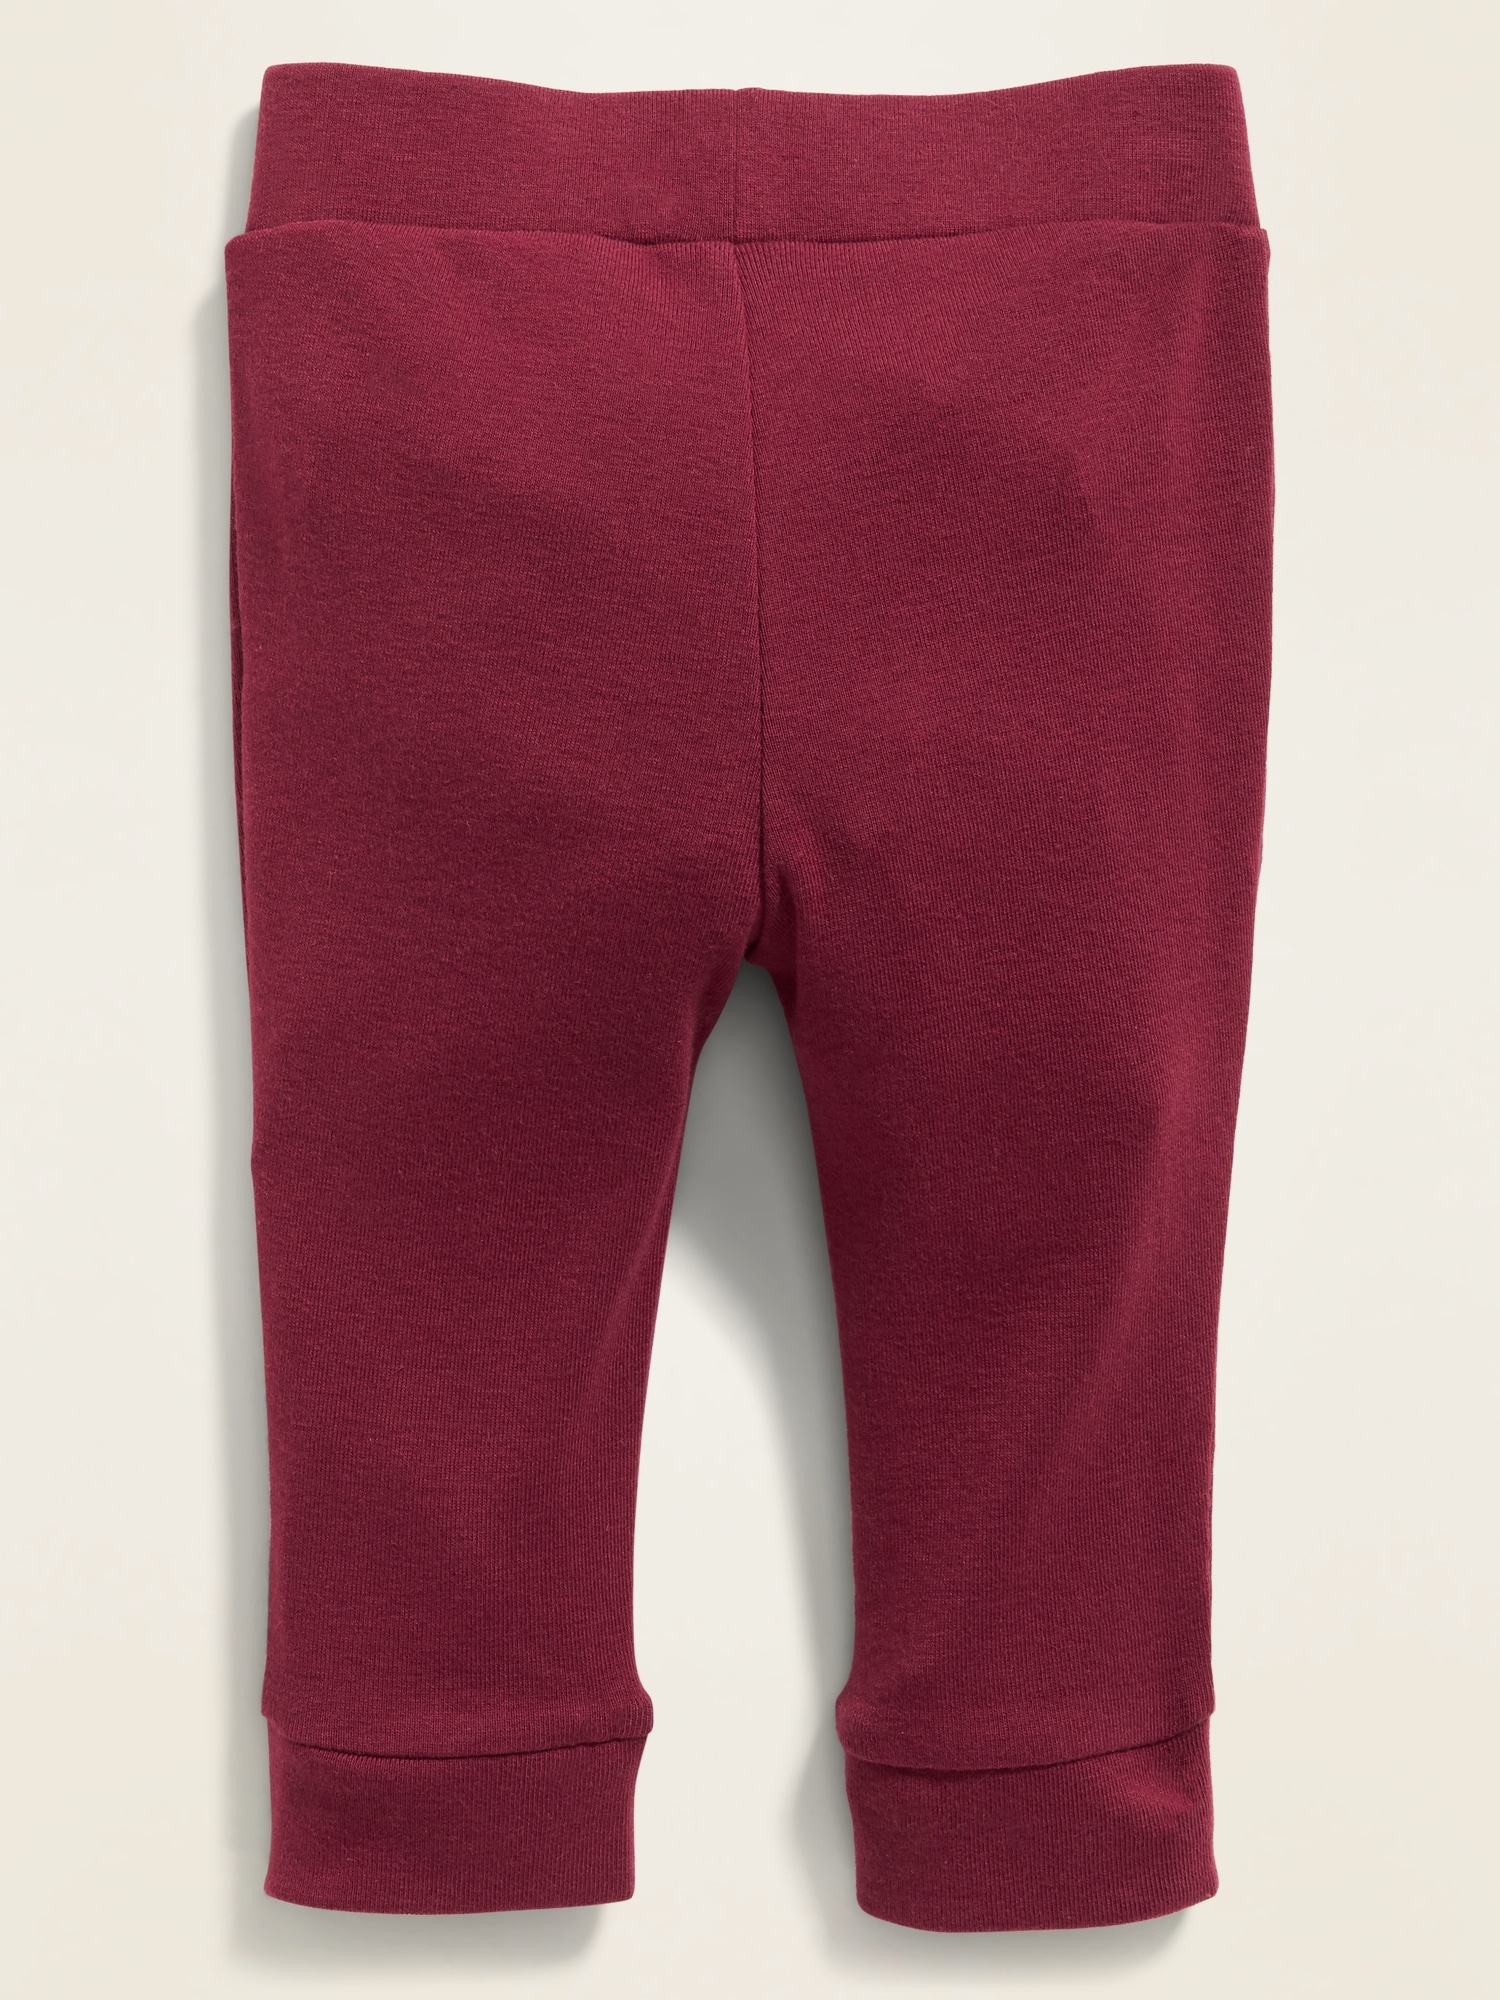 Unisex Solid Leggings for Baby | Old Navy